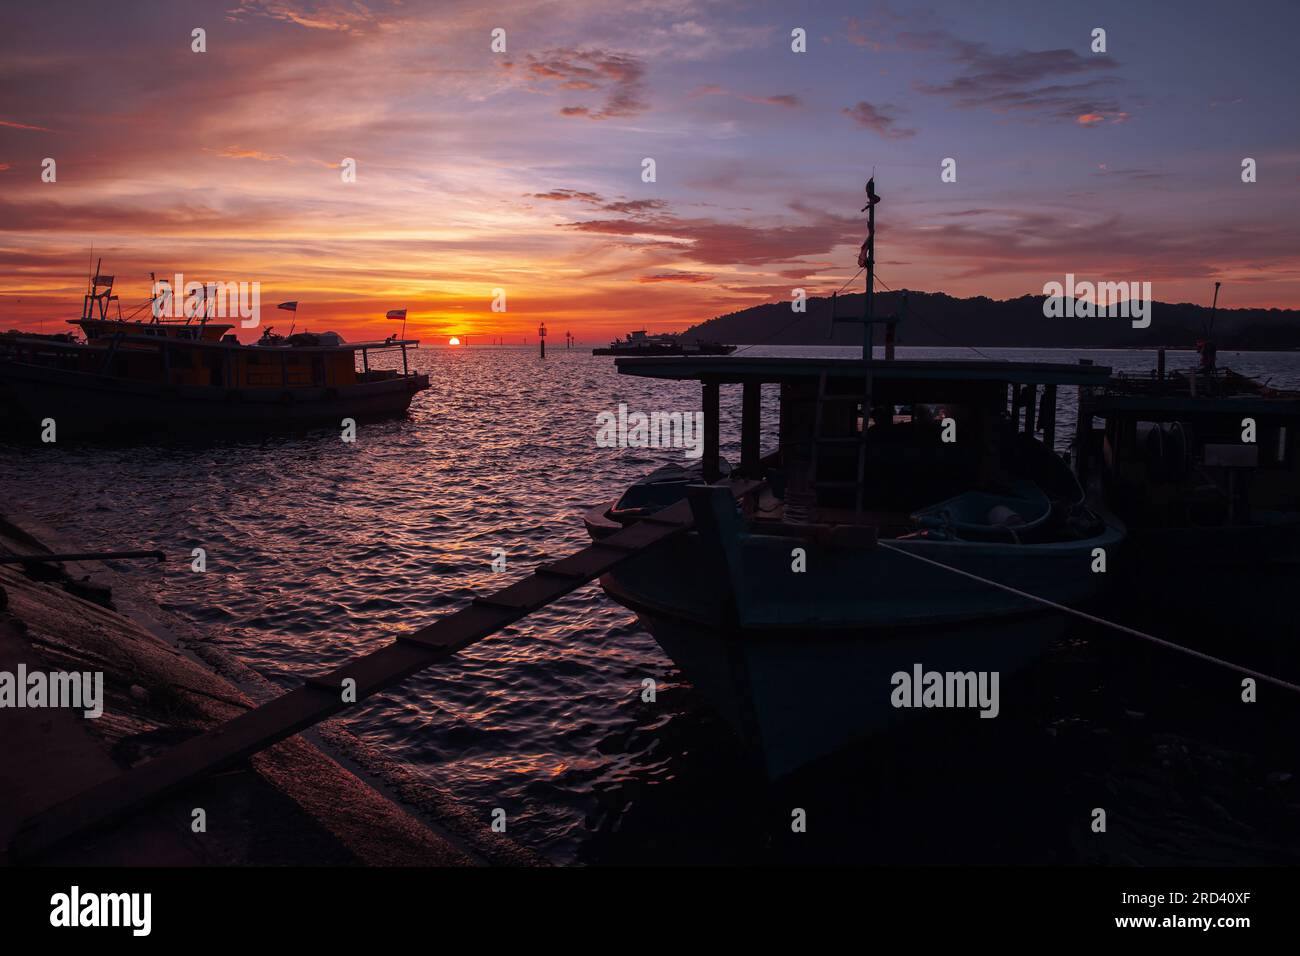 Fishing boats with Malaysian flags moored at KK Fish Market on a sunset Stock Photo